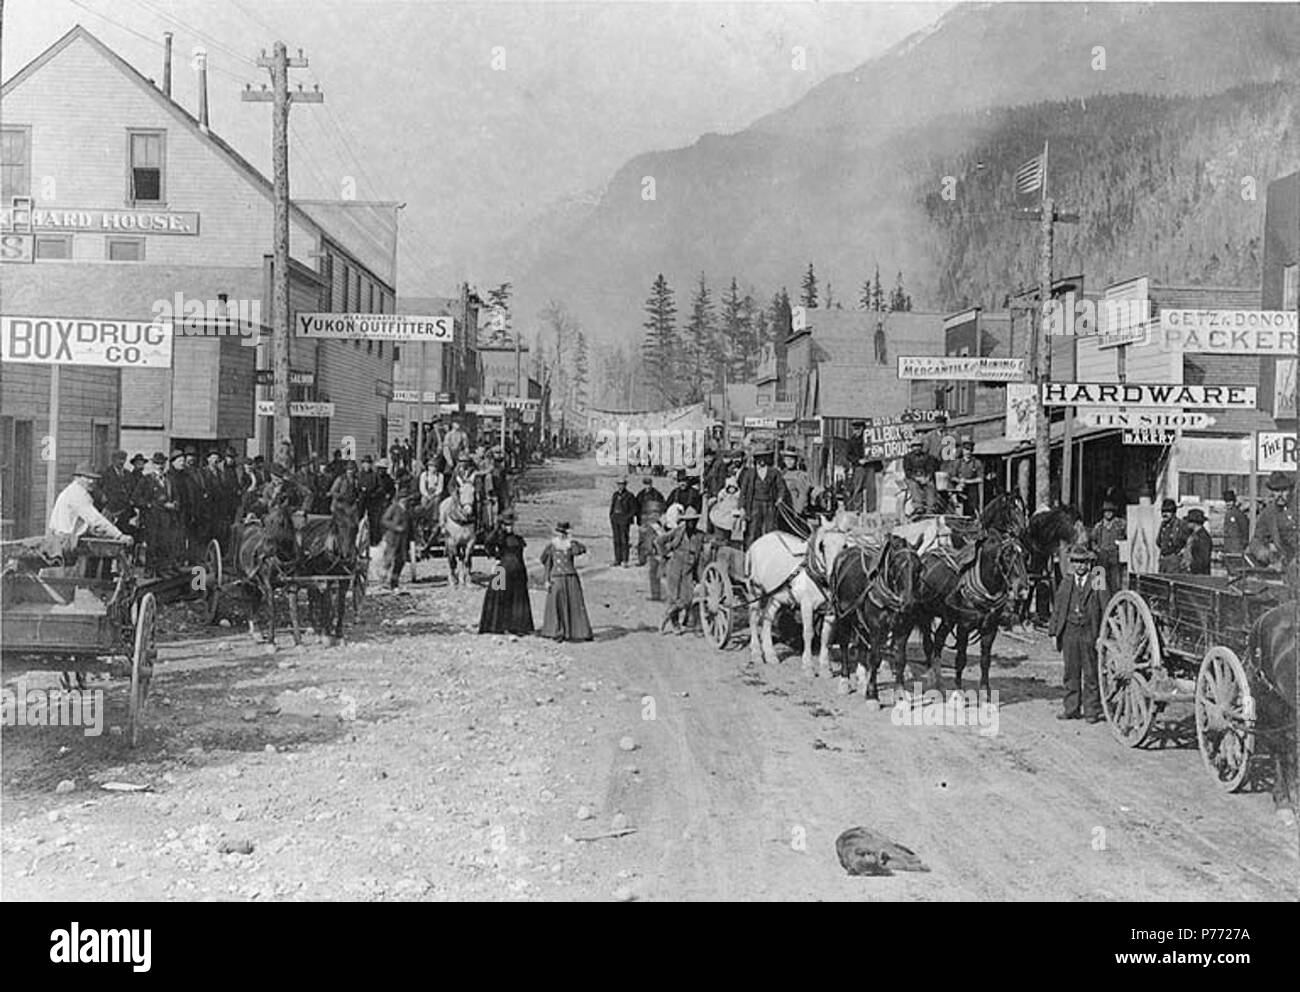 . English: Broadway, Skagway, Alaska, May 20, 1898. English: Shows two women and horse drawn wagons in street, Headquarters Yukon Outfitters on left, Getz & Donovon Packers and Dyea Mercantile & Mining Co. on right Original image in Hegg Album 7, page 13 . Klondike Gold Rush. Subjects (LCTGM): Streets--Alaska--Skagway; Carts & wagons--Alaska--Skagway; Horses--Alaska--Skagway; Business districts--Alaska--Skagway Subjects (LCSH): Broadway (Skagway, Alaska); Yukon Outfitters (Skagway, Alaska); Getz & Donovan Packers (Skagway, Alaska); Dyea Mercantile & Mining Company (Skagway, Alaska)  . 1898 2 B Stock Photo